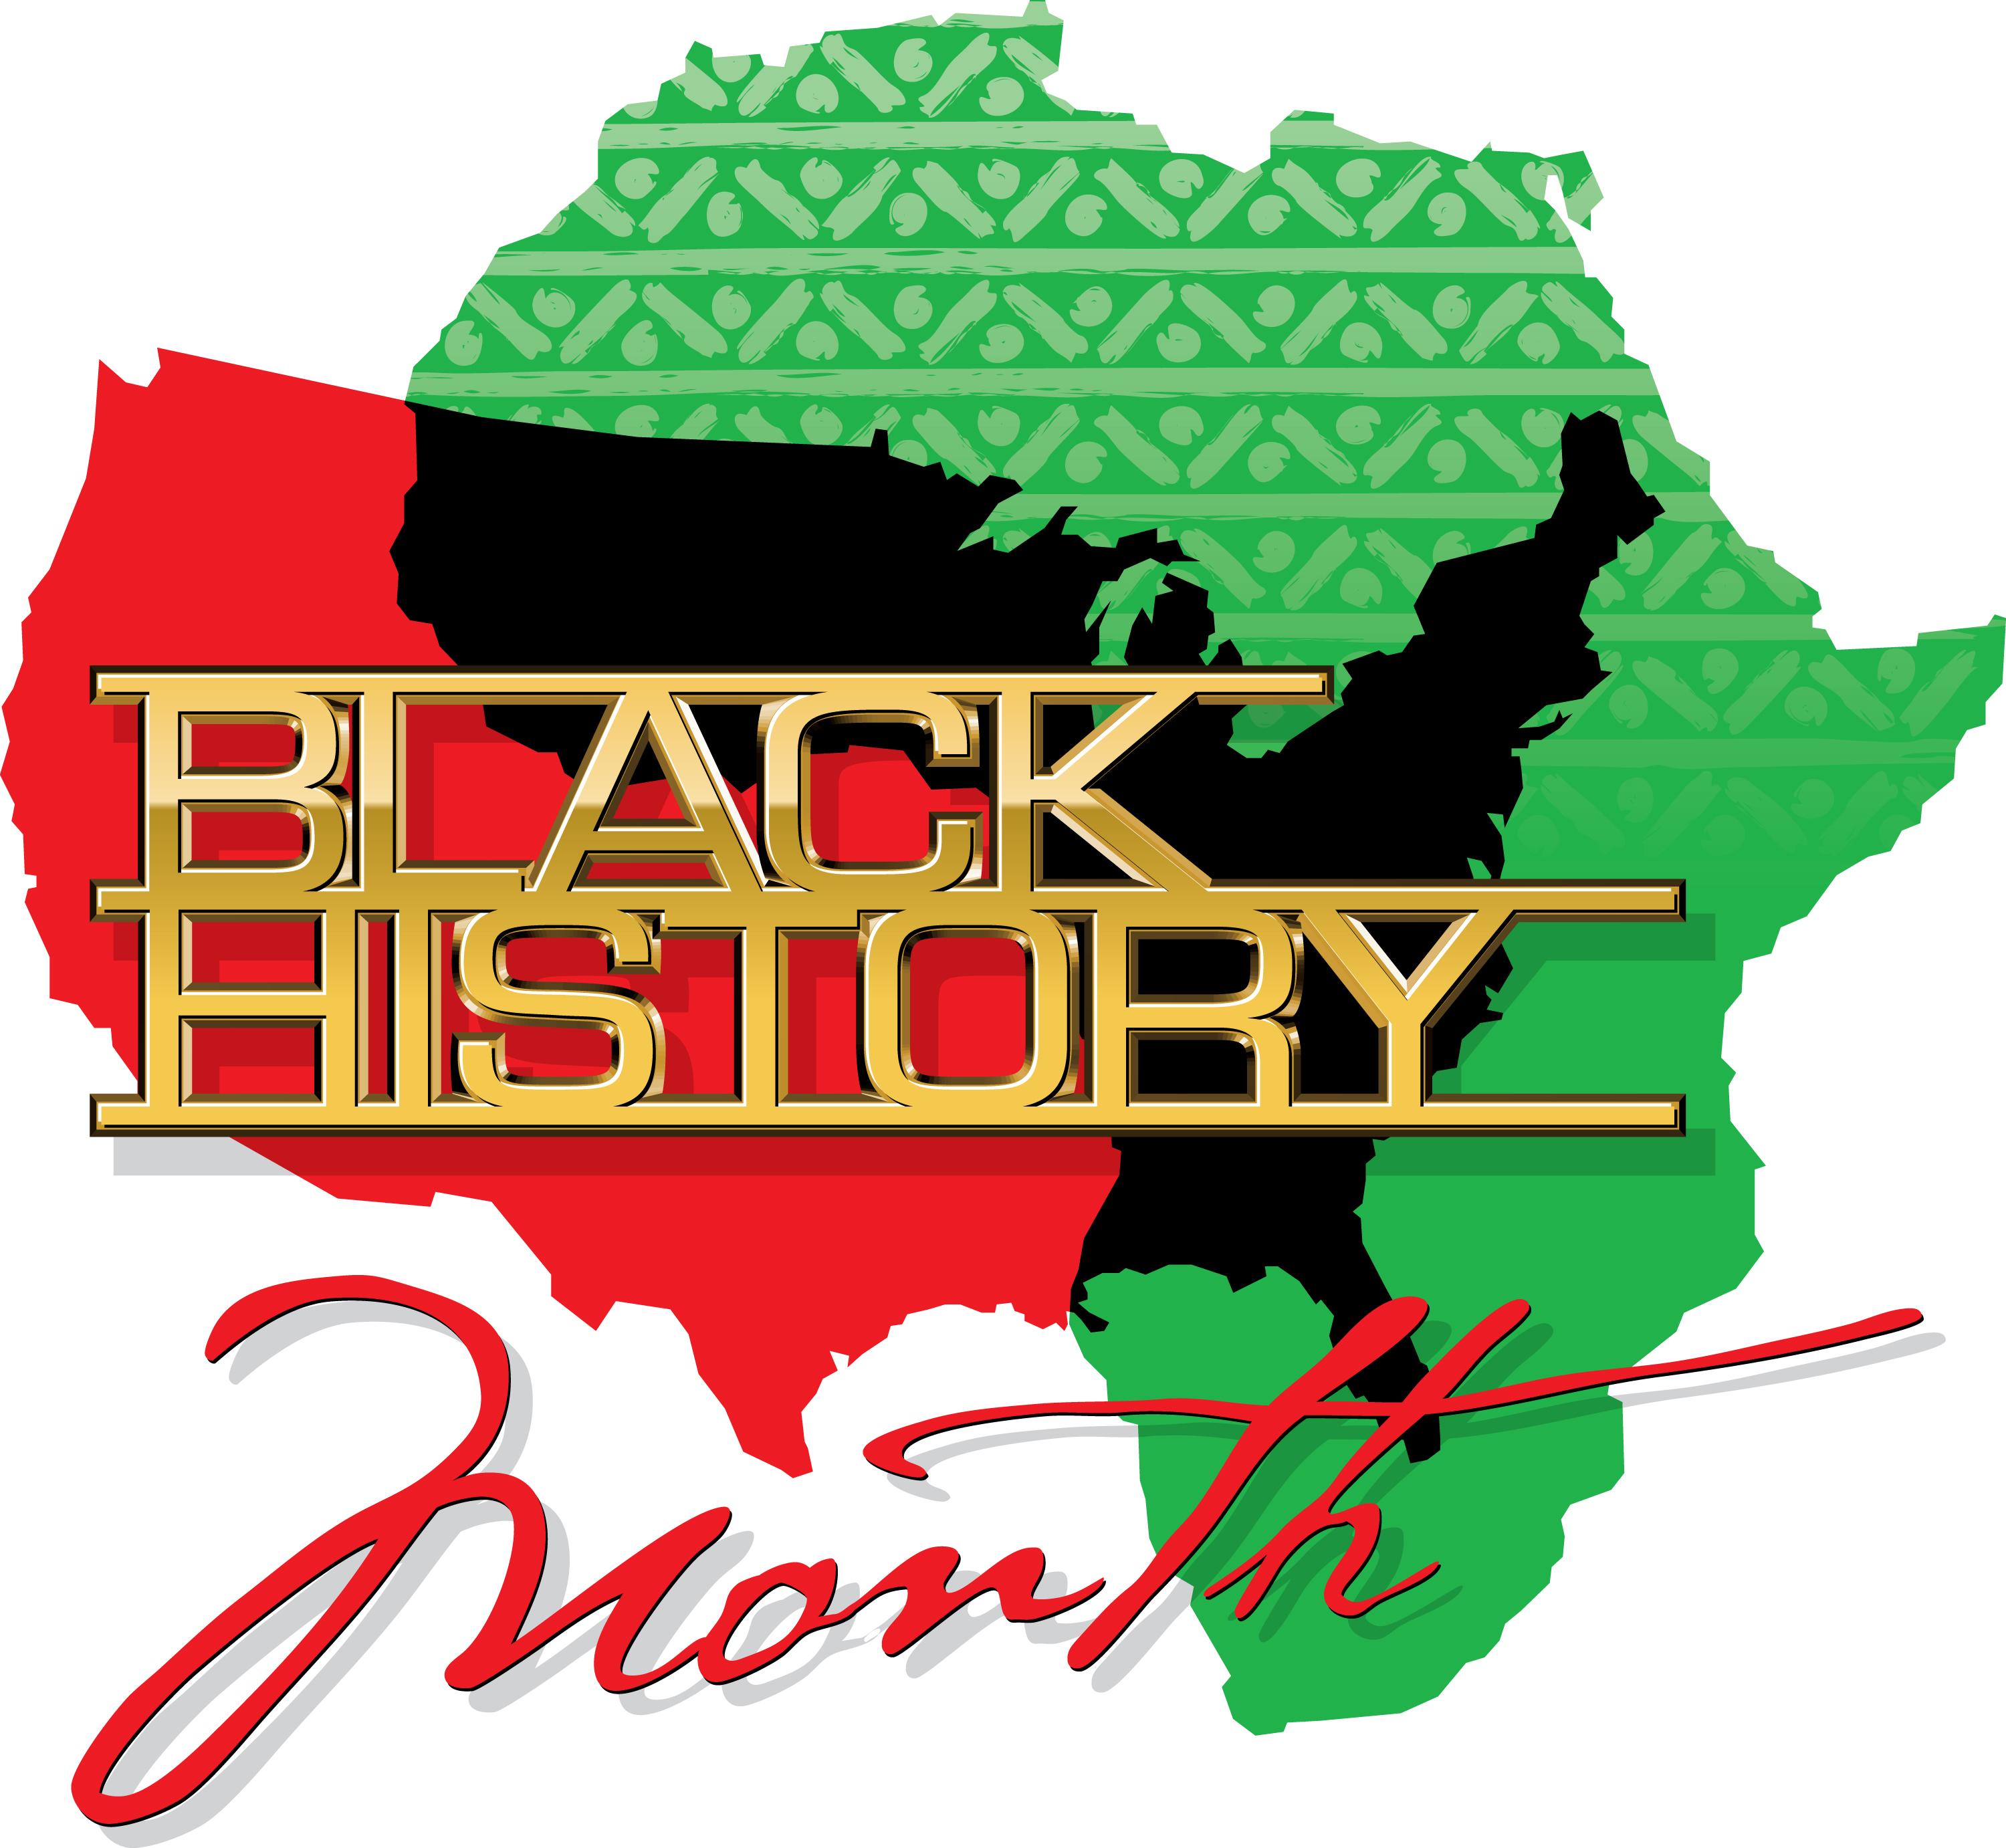 Celebrate Black History Month with AARP